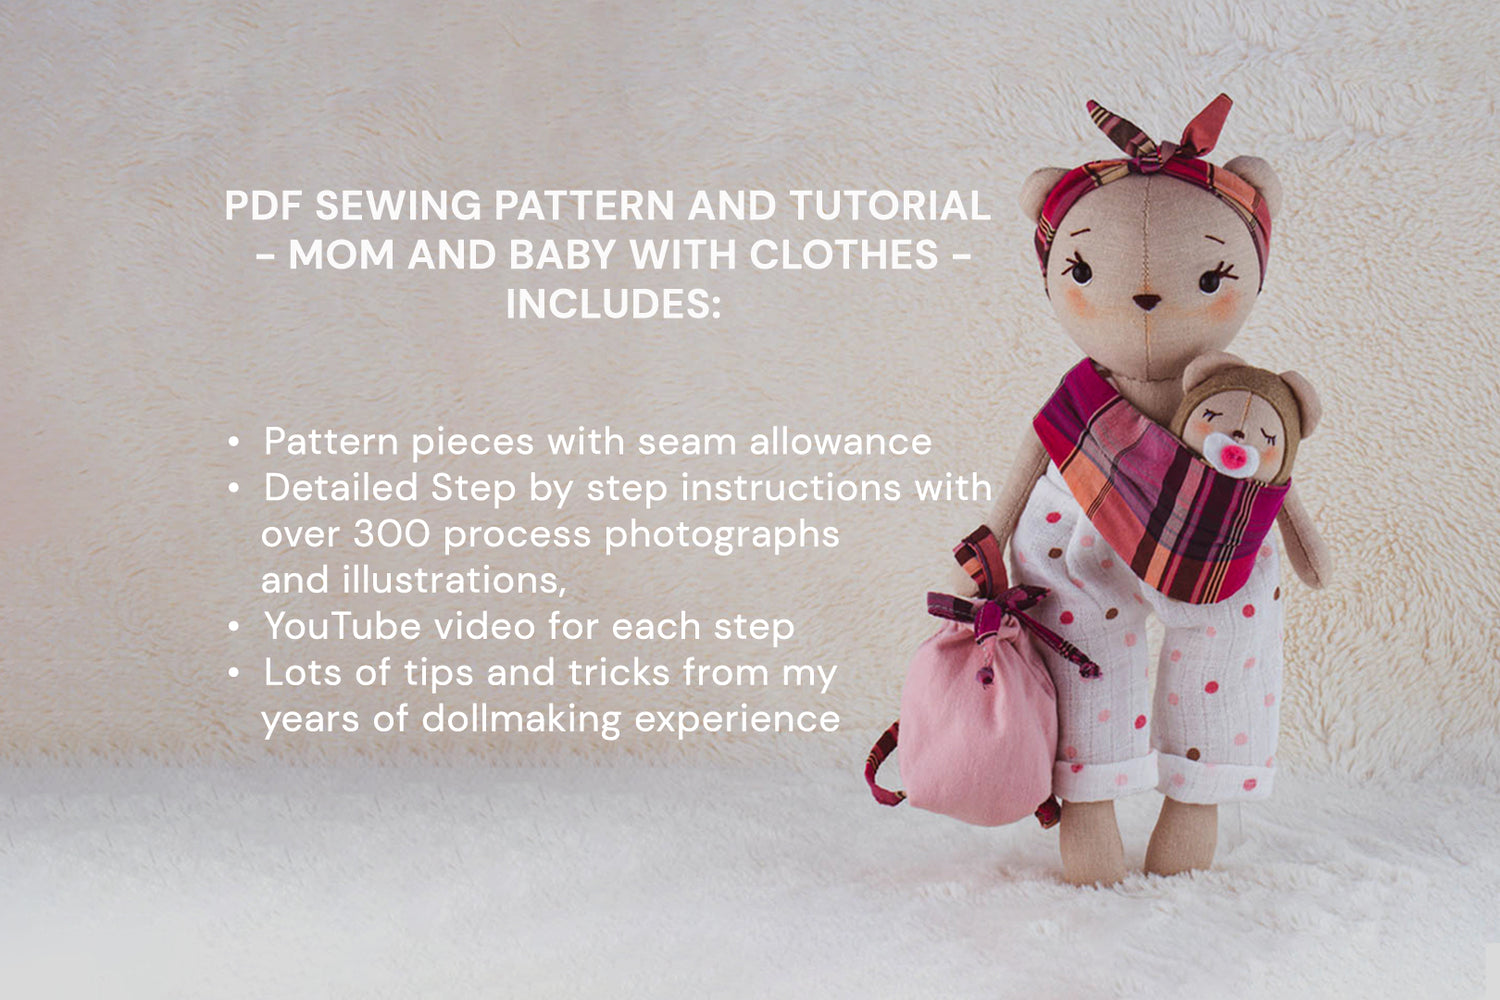 PDF sewing pattern and tutorial